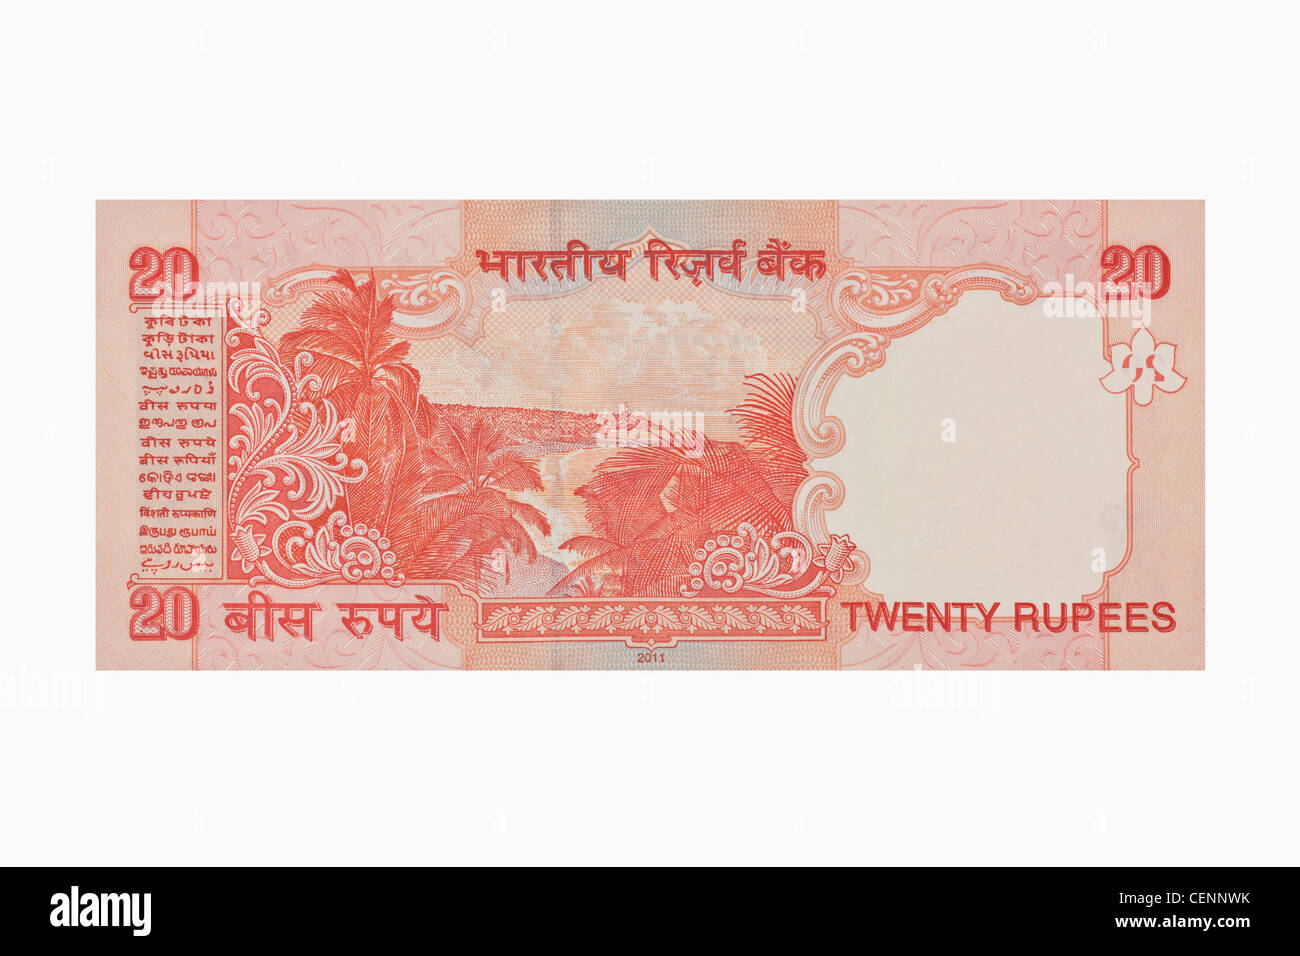 Back side of the Indian 20 rupee bill, India, Asia Stock Photo